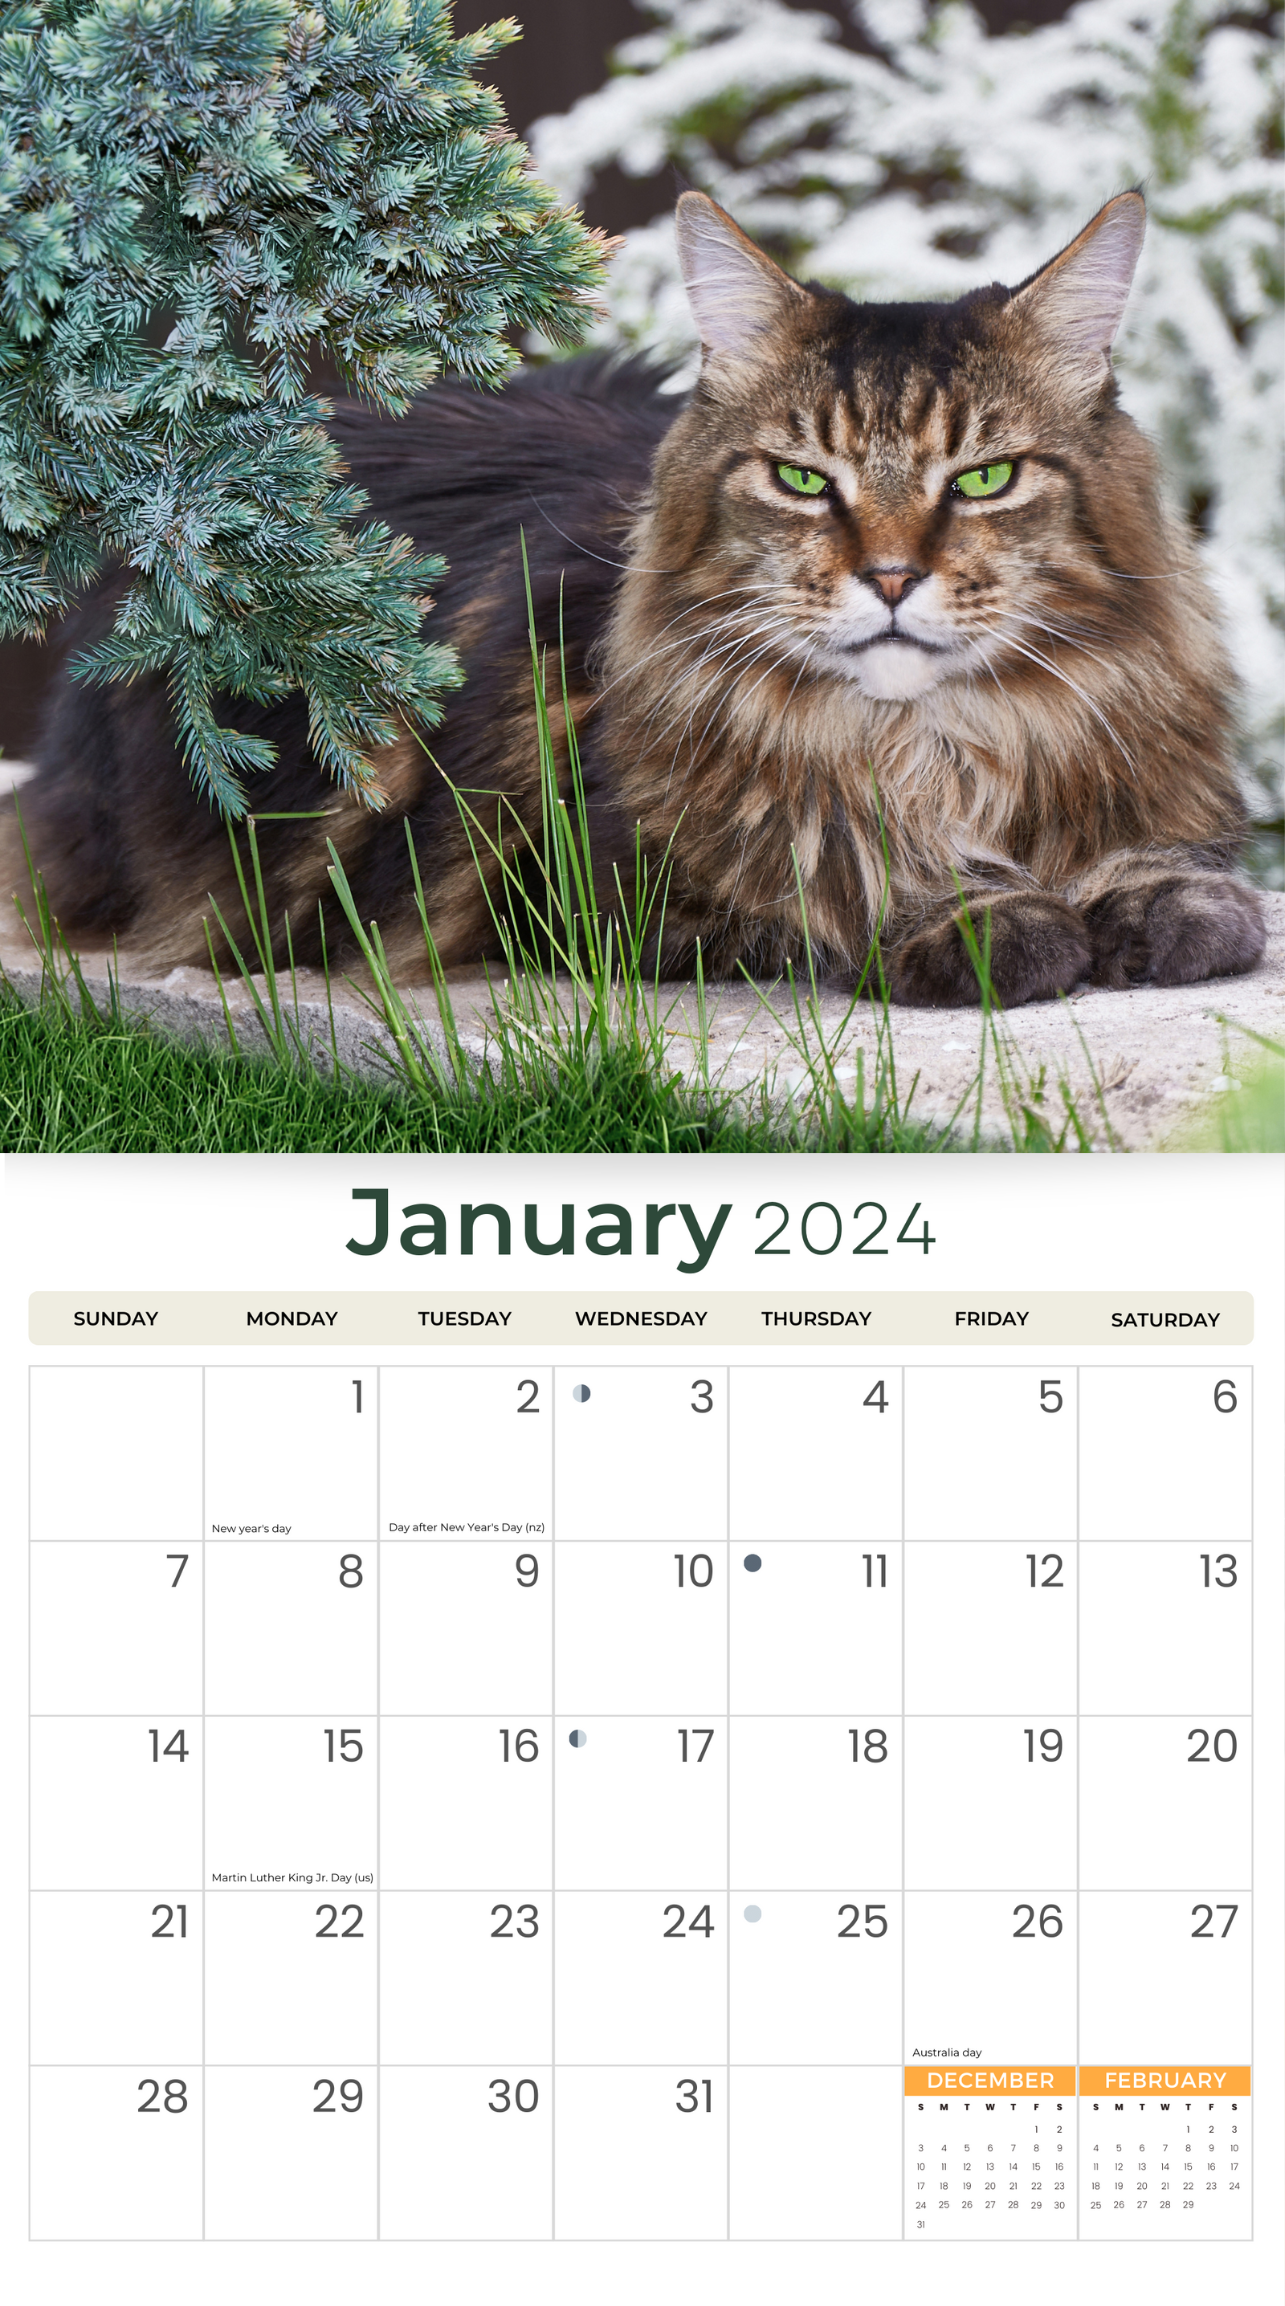 2024 Maine Coon Cats & Kittens - Deluxe Wall Calendar by Just Calendars - 16 Month - Plastic Free